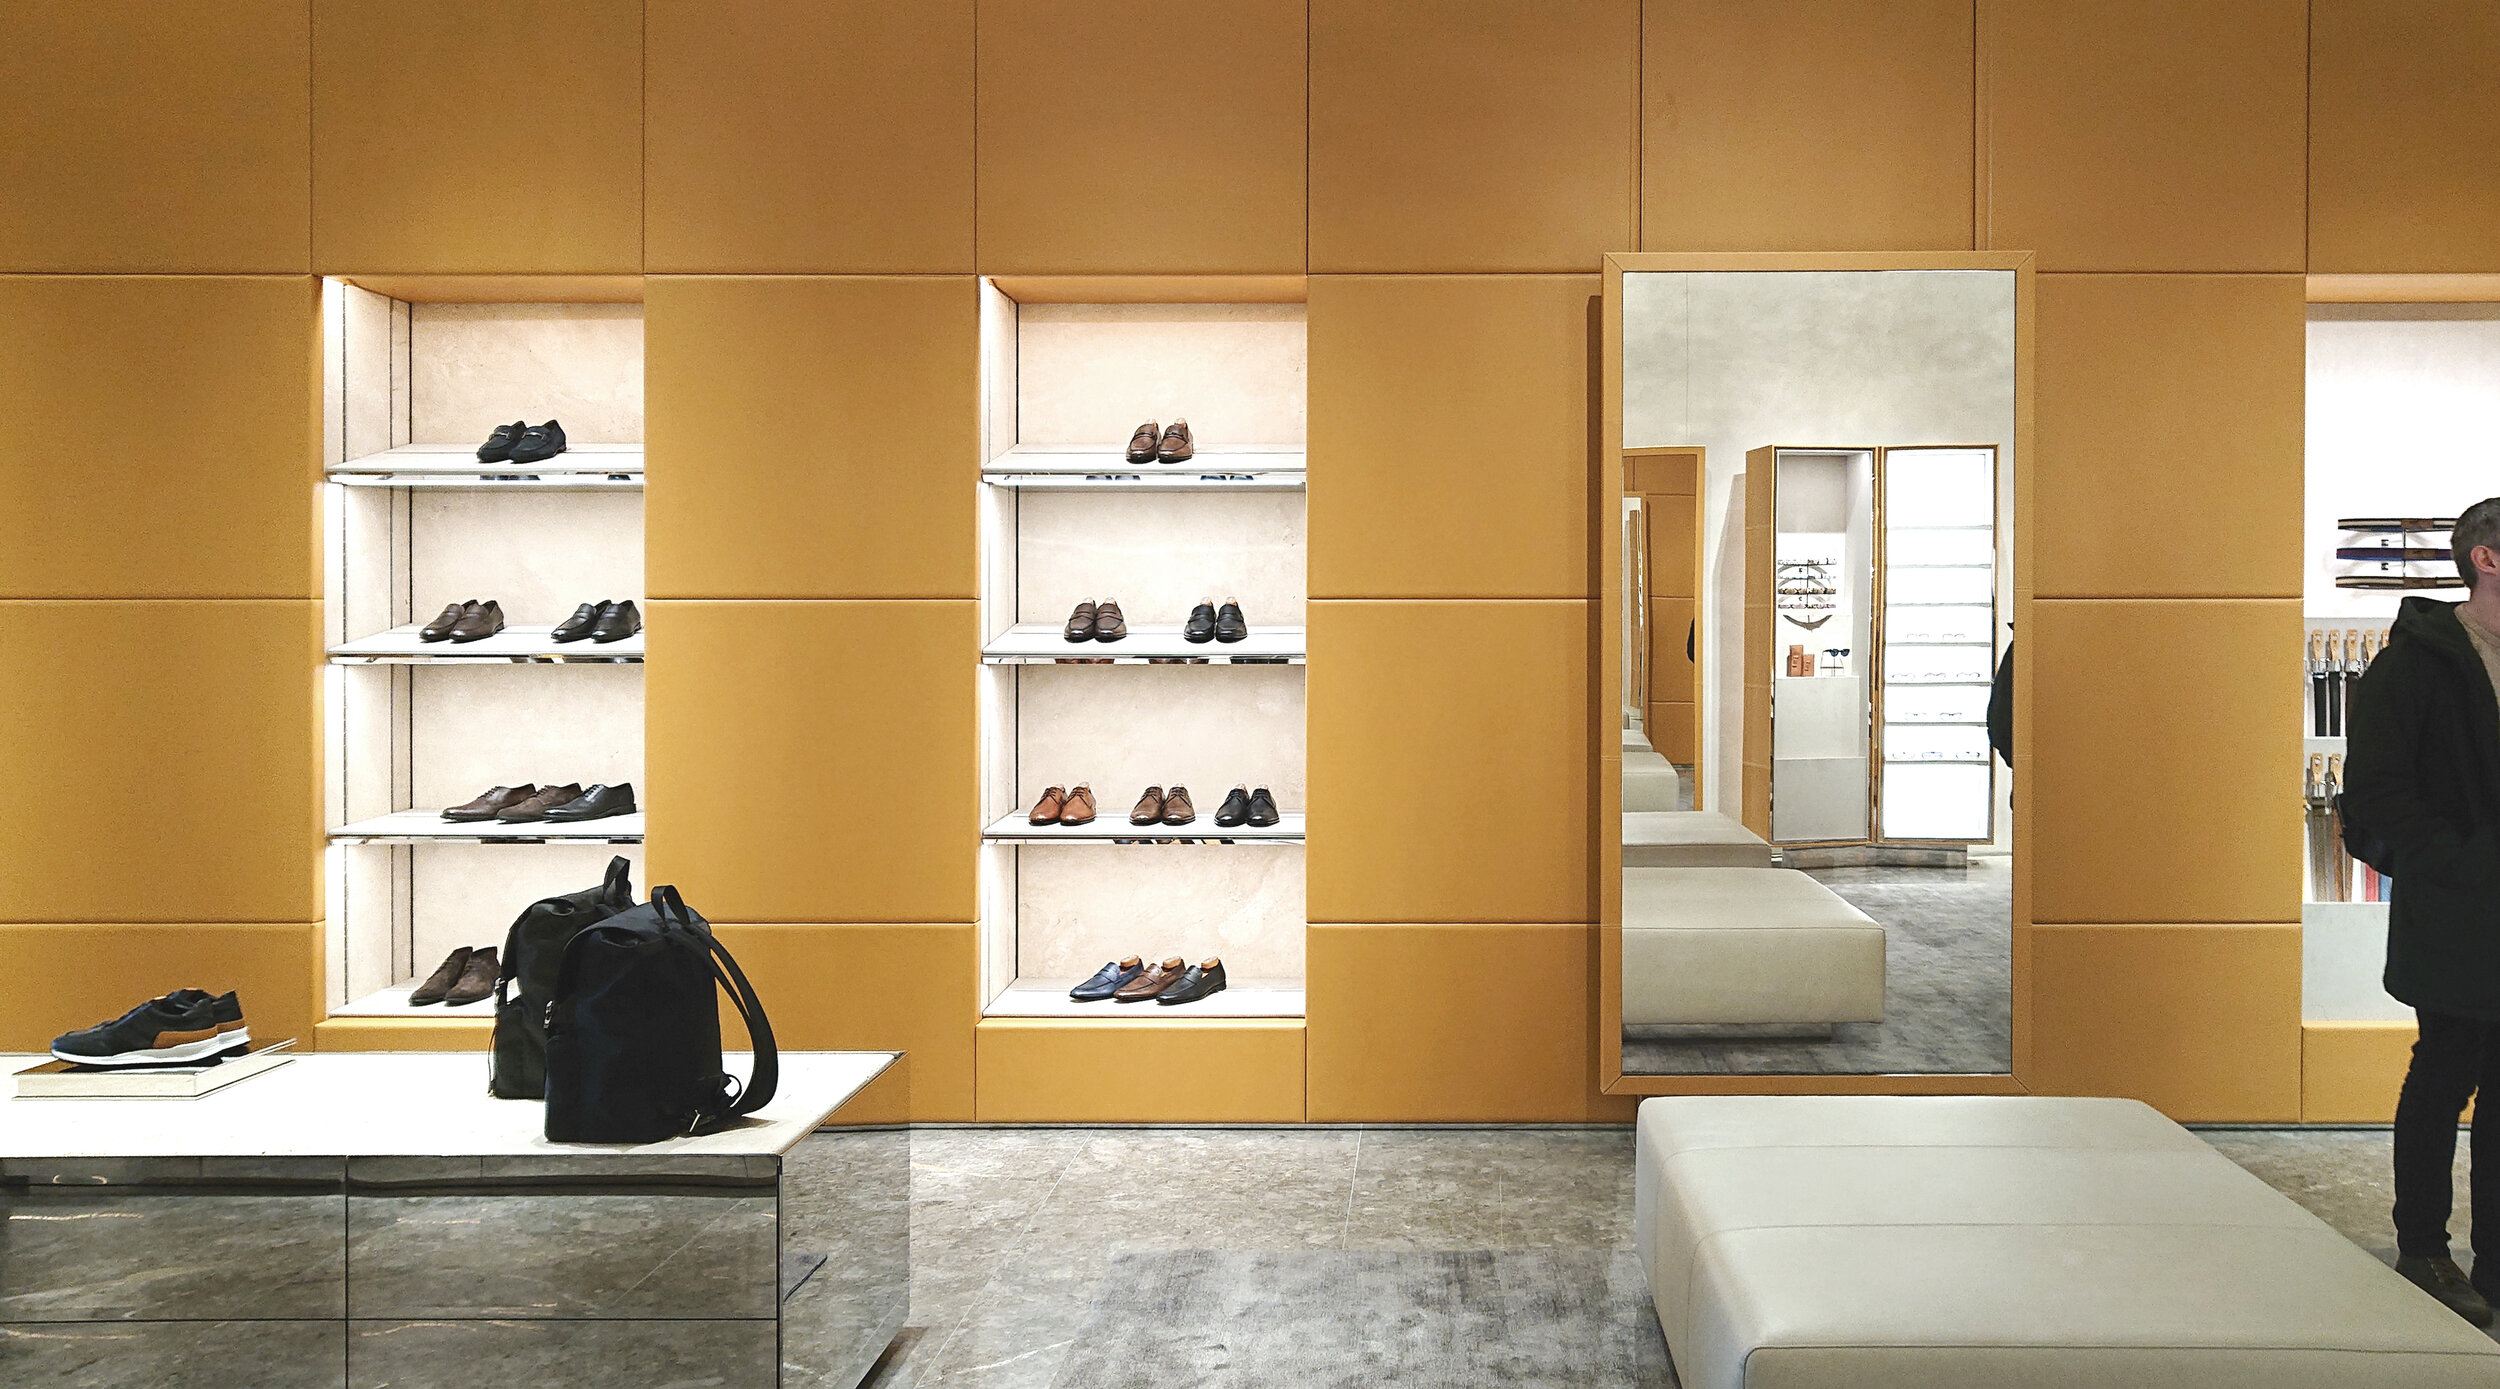  Tod’s Hudson Yards - Leather Wall With Display Niches 